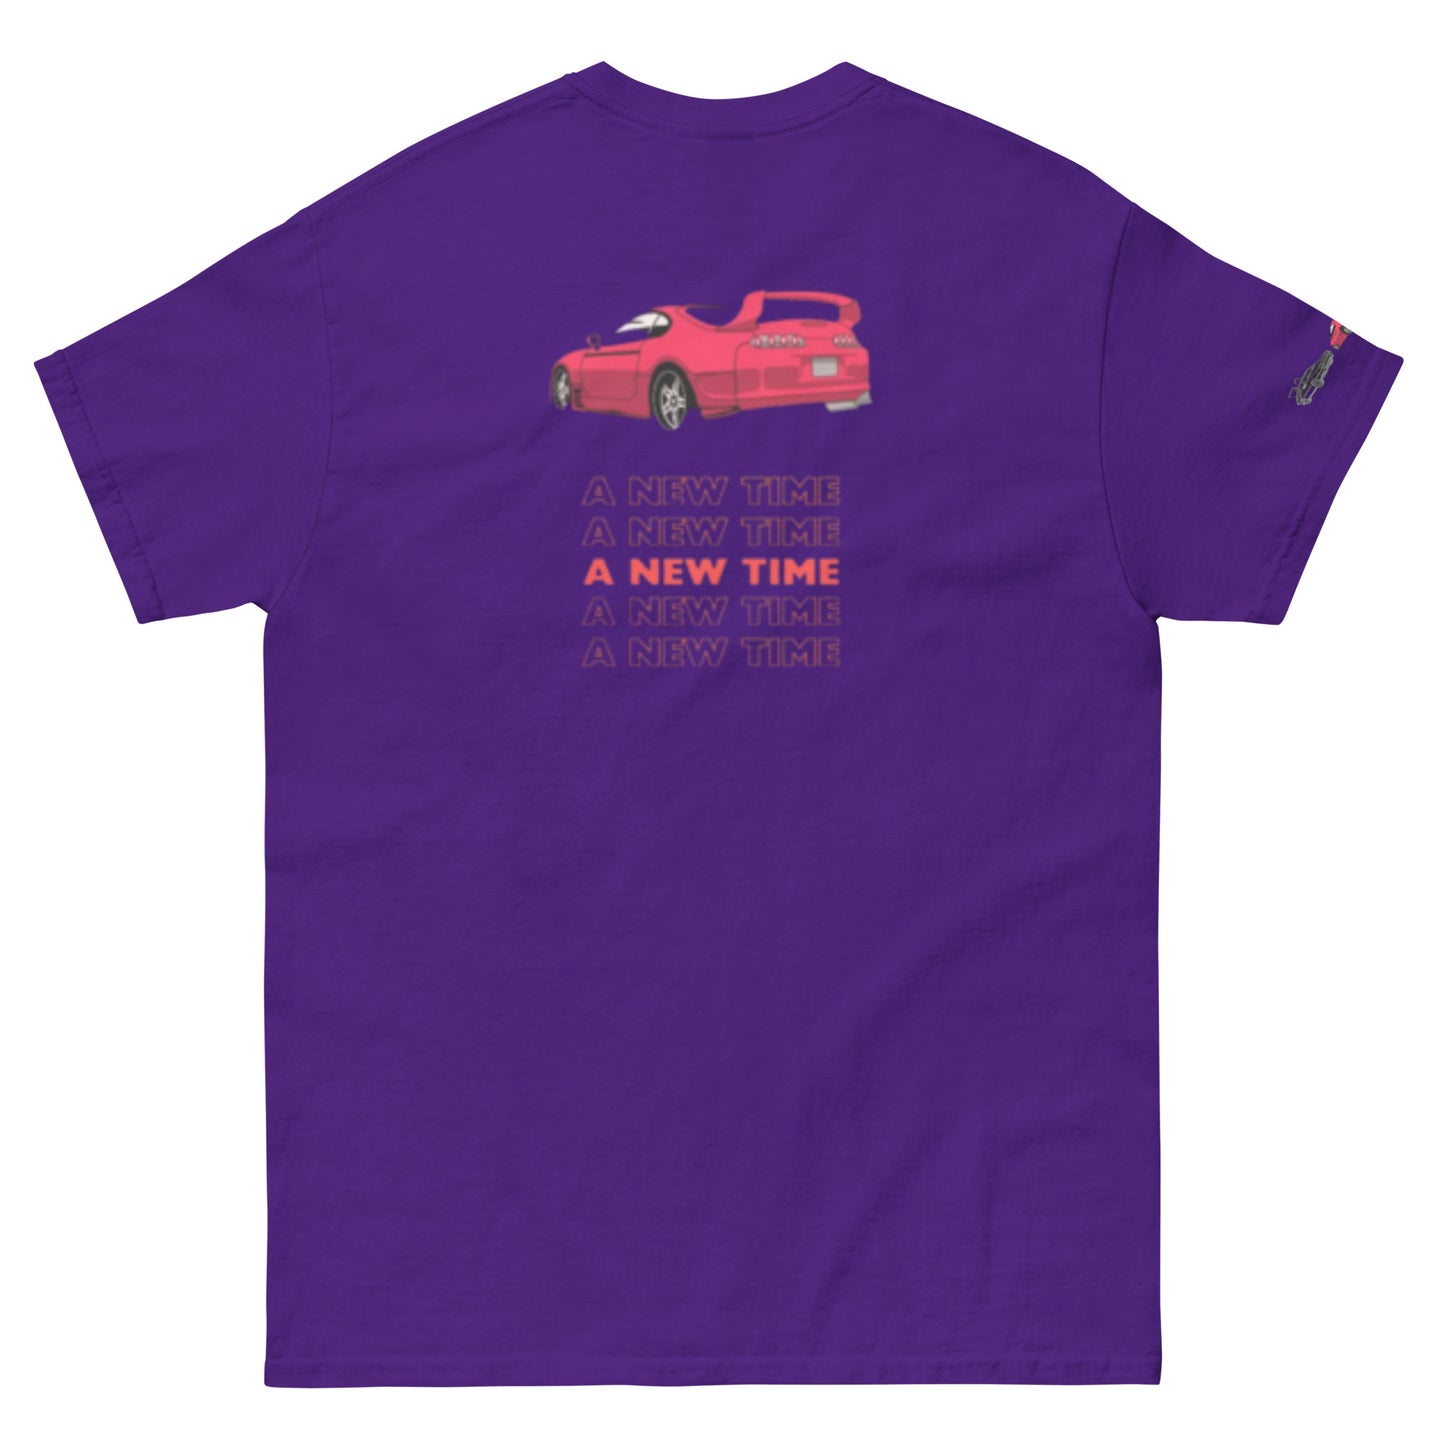 Supra T-shirt (Part of Deluxe Cars Collection)